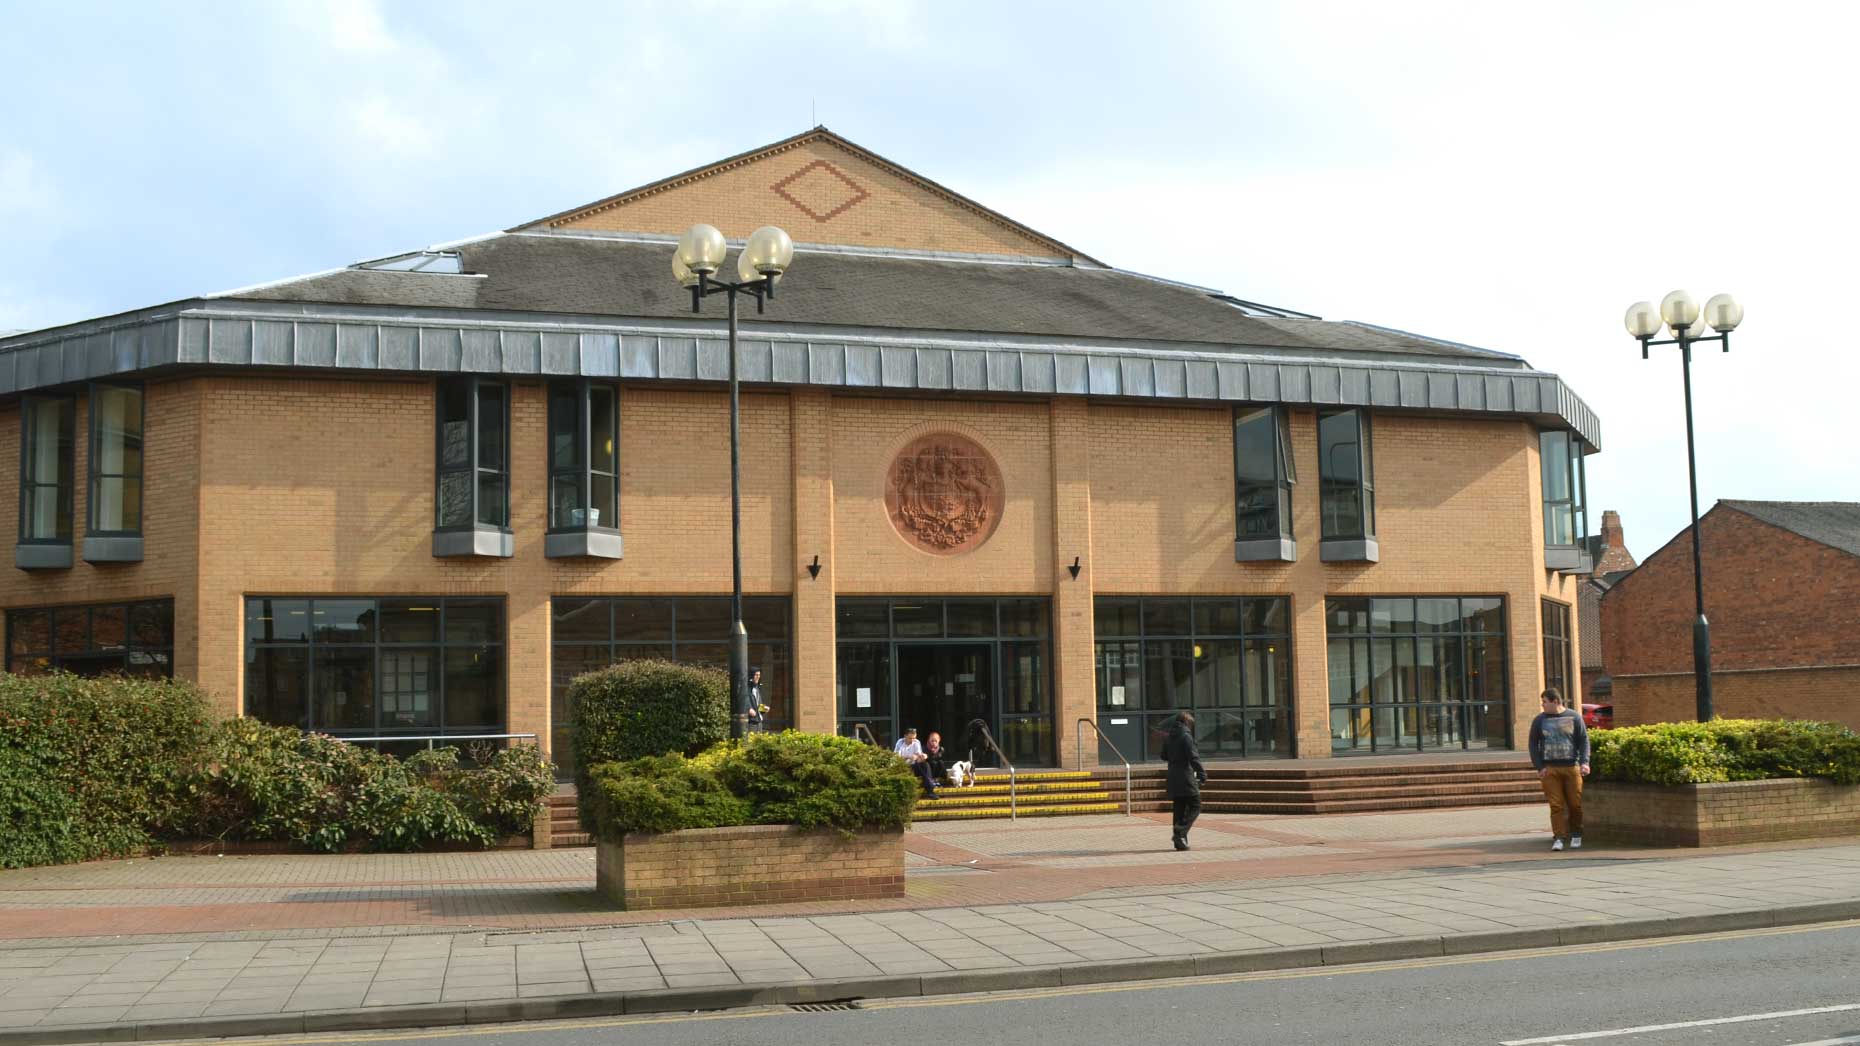 Lincoln Magistrates Court on the High Street. Photo: File/The Lincolnite